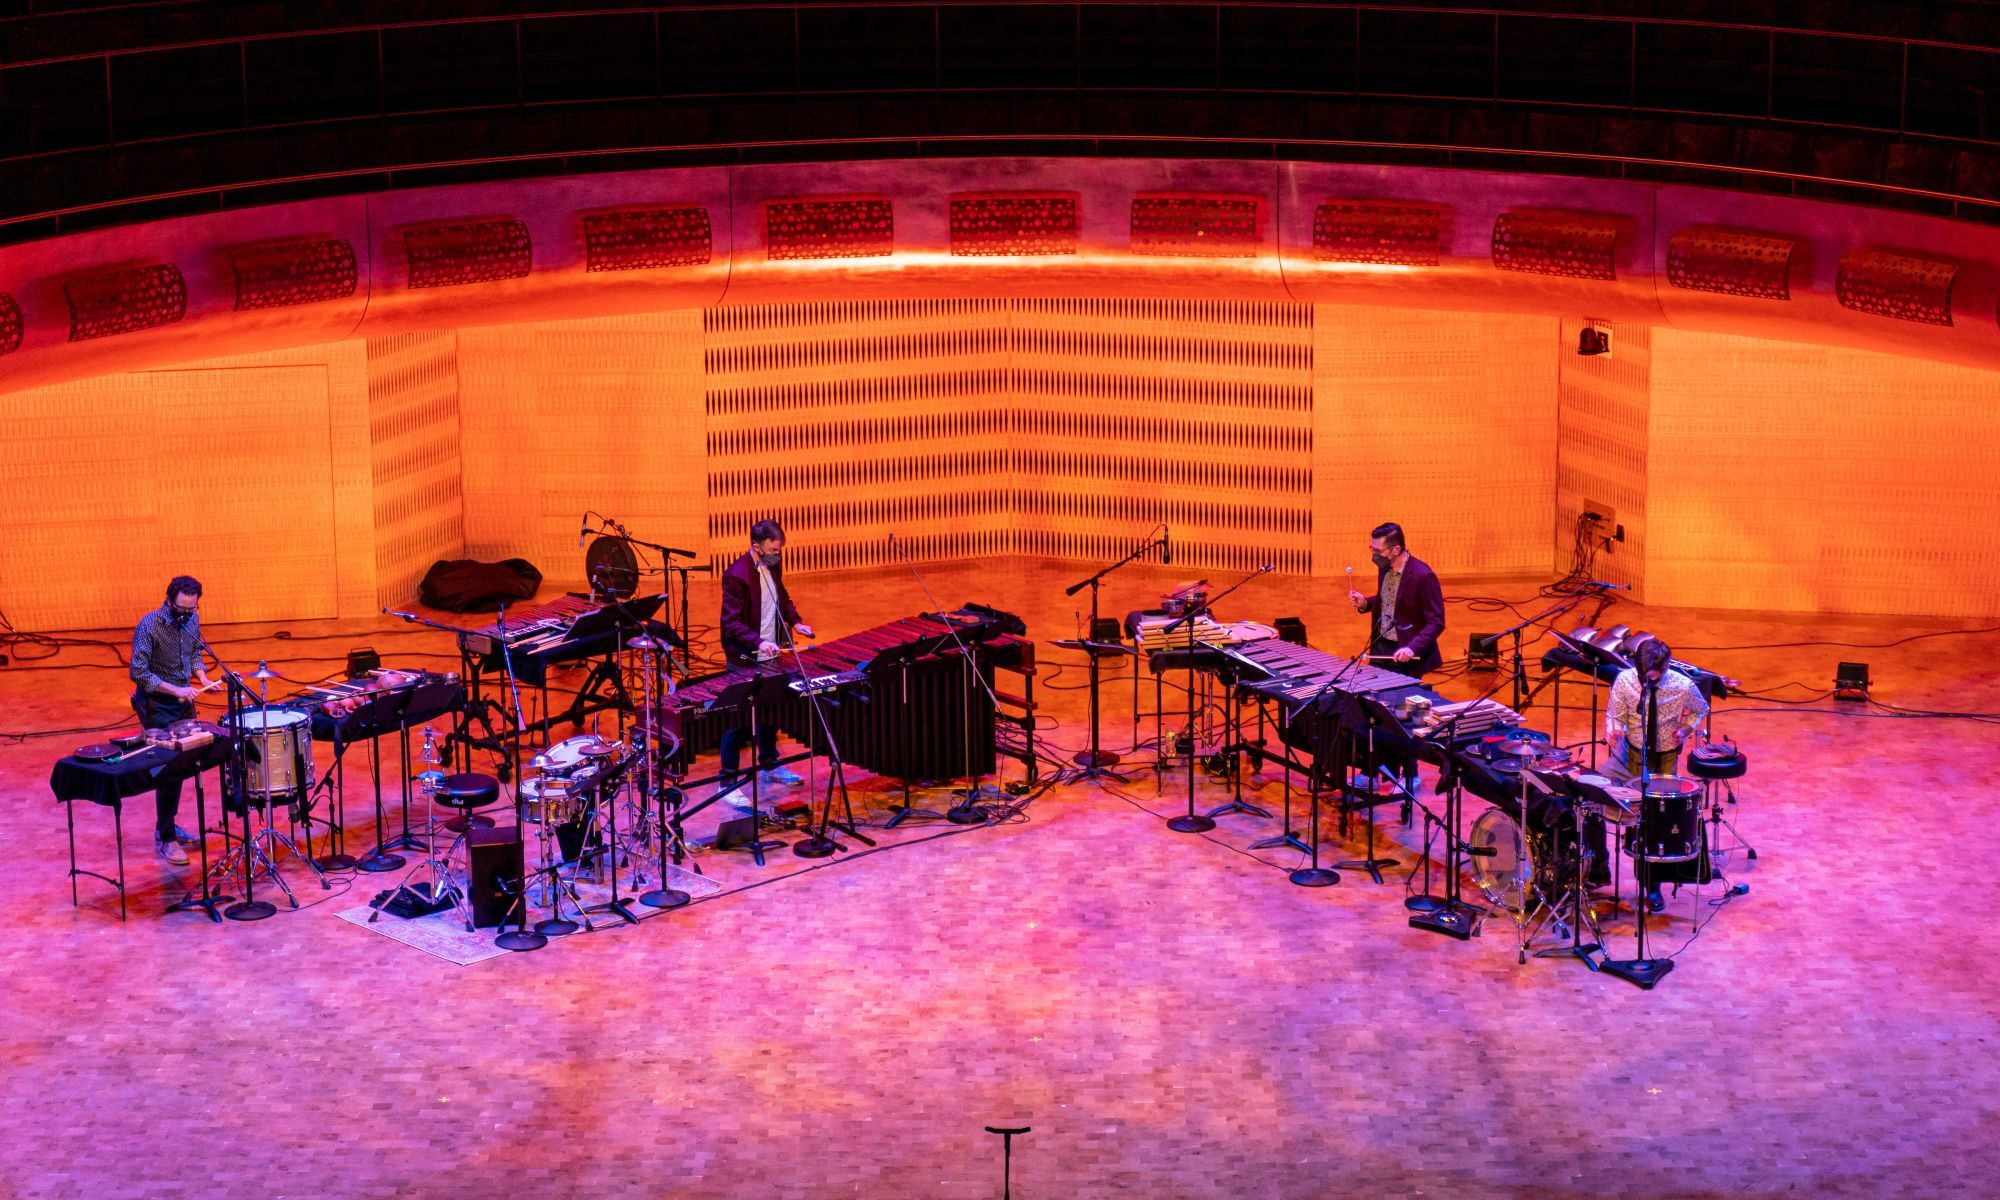 Four musicians playing a mix of percussion instruments under orange lighting.